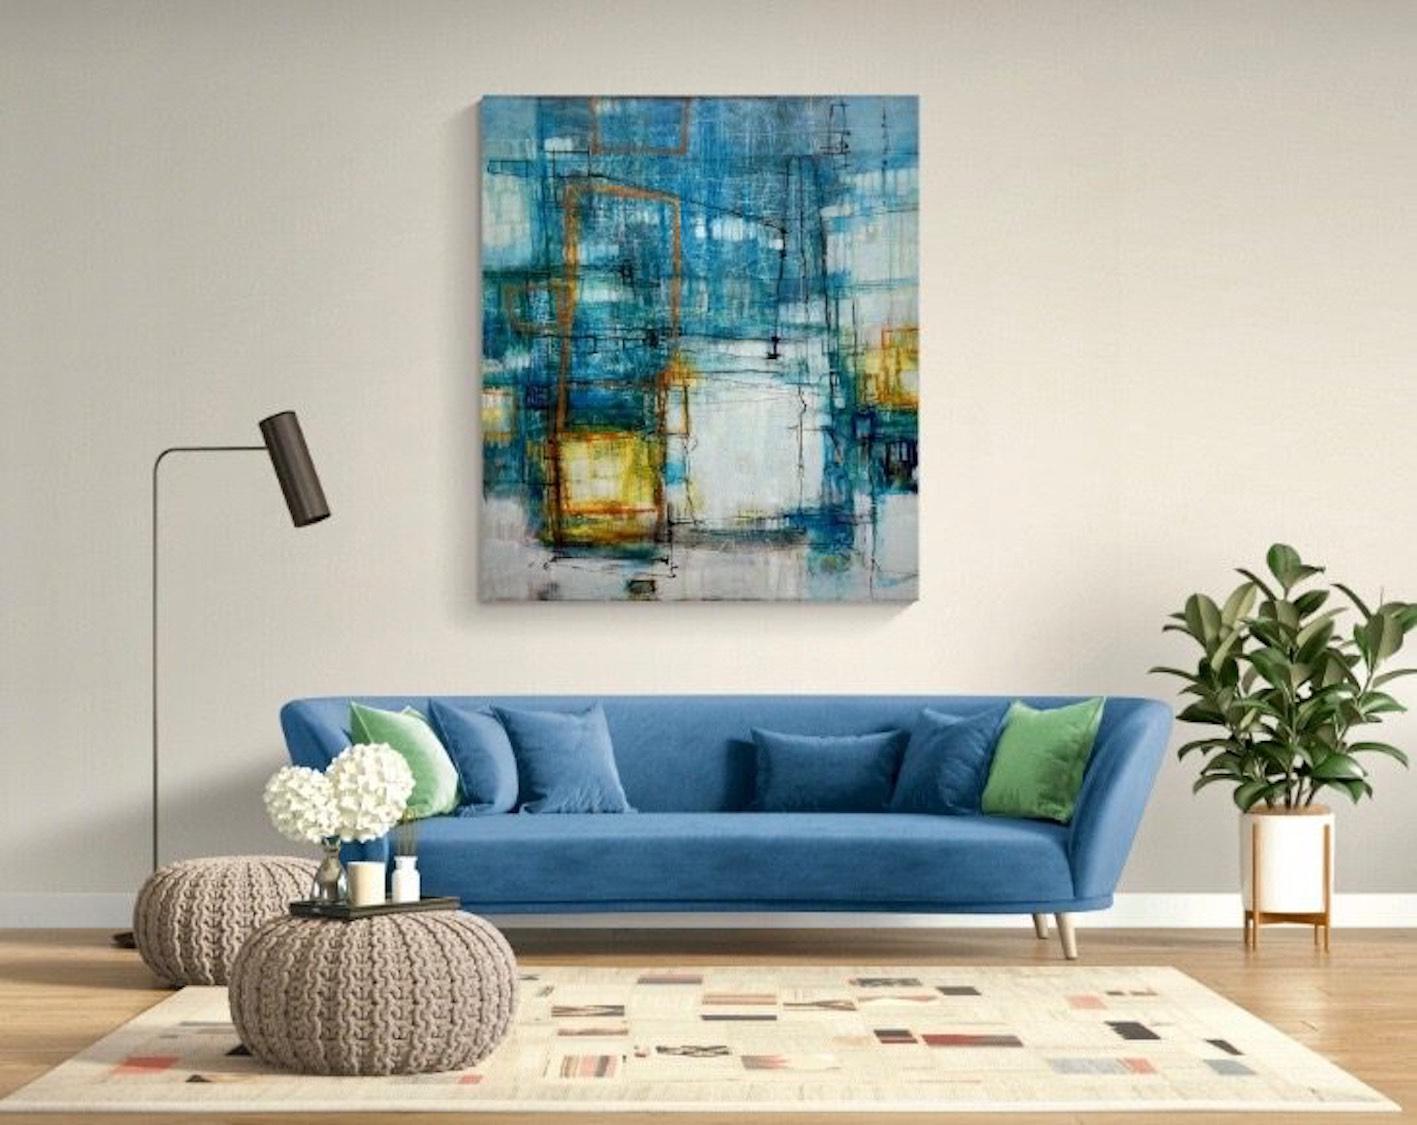 Contemporary mixed-media painter Lori Mirabelli depicts an abstract composition which evokes the pleasure and enjoyment of dancing. The artist applies layers of abstract sweeps of paint work which is highly gestural and expressive, creating a joyful